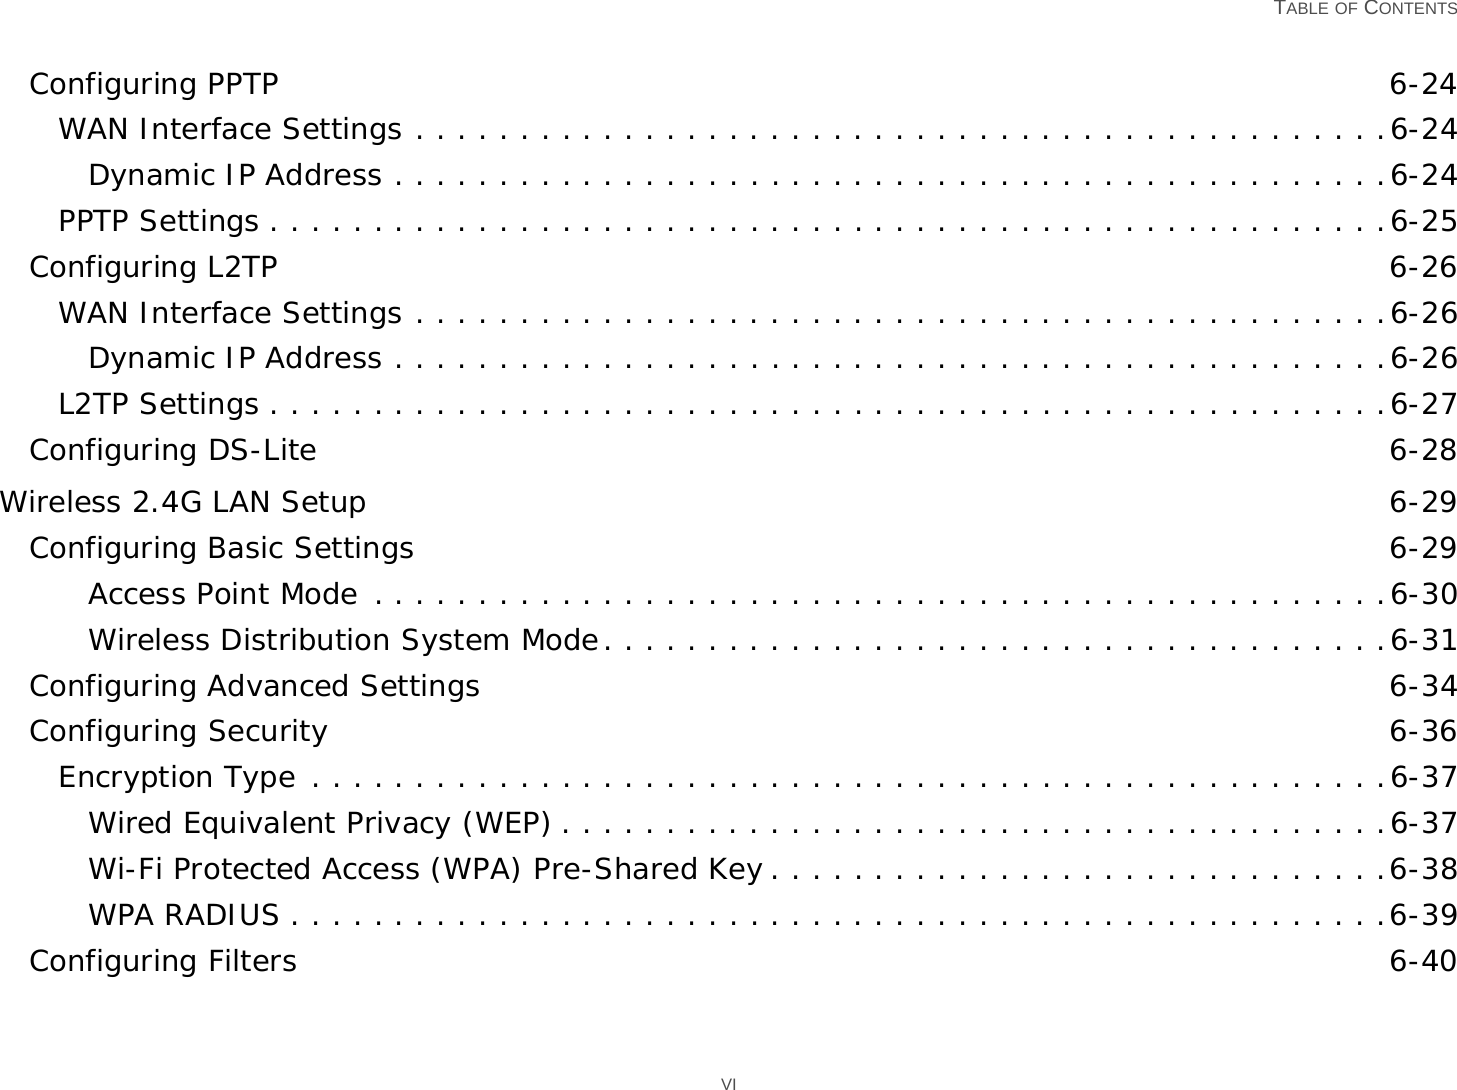   TABLE OF CONTENTS VIConfiguring PPTP 6-24WAN Interface Settings . . . . . . . . . . . . . . . . . . . . . . . . . . . . . . . . . . . . . . . . . . . . . . .6-24Dynamic IP Address . . . . . . . . . . . . . . . . . . . . . . . . . . . . . . . . . . . . . . . . . . . . . . . .6-24PPTP Settings . . . . . . . . . . . . . . . . . . . . . . . . . . . . . . . . . . . . . . . . . . . . . . . . . . . . . .6-25Configuring L2TP 6-26WAN Interface Settings . . . . . . . . . . . . . . . . . . . . . . . . . . . . . . . . . . . . . . . . . . . . . . .6-26Dynamic IP Address . . . . . . . . . . . . . . . . . . . . . . . . . . . . . . . . . . . . . . . . . . . . . . . .6-26L2TP Settings . . . . . . . . . . . . . . . . . . . . . . . . . . . . . . . . . . . . . . . . . . . . . . . . . . . . . .6-27Configuring DS-Lite 6-28Wireless 2.4G LAN Setup 6-29Configuring Basic Settings 6-29Access Point Mode . . . . . . . . . . . . . . . . . . . . . . . . . . . . . . . . . . . . . . . . . . . . . . . . .6-30Wireless Distribution System Mode. . . . . . . . . . . . . . . . . . . . . . . . . . . . . . . . . . . . . .6-31Configuring Advanced Settings 6-34Configuring Security 6-36Encryption Type . . . . . . . . . . . . . . . . . . . . . . . . . . . . . . . . . . . . . . . . . . . . . . . . . . . .6-37Wired Equivalent Privacy (WEP) . . . . . . . . . . . . . . . . . . . . . . . . . . . . . . . . . . . . . . . .6-37Wi-Fi Protected Access (WPA) Pre-Shared Key . . . . . . . . . . . . . . . . . . . . . . . . . . . . . .6-38WPA RADIUS . . . . . . . . . . . . . . . . . . . . . . . . . . . . . . . . . . . . . . . . . . . . . . . . . . . . .6-39Configuring Filters 6-40